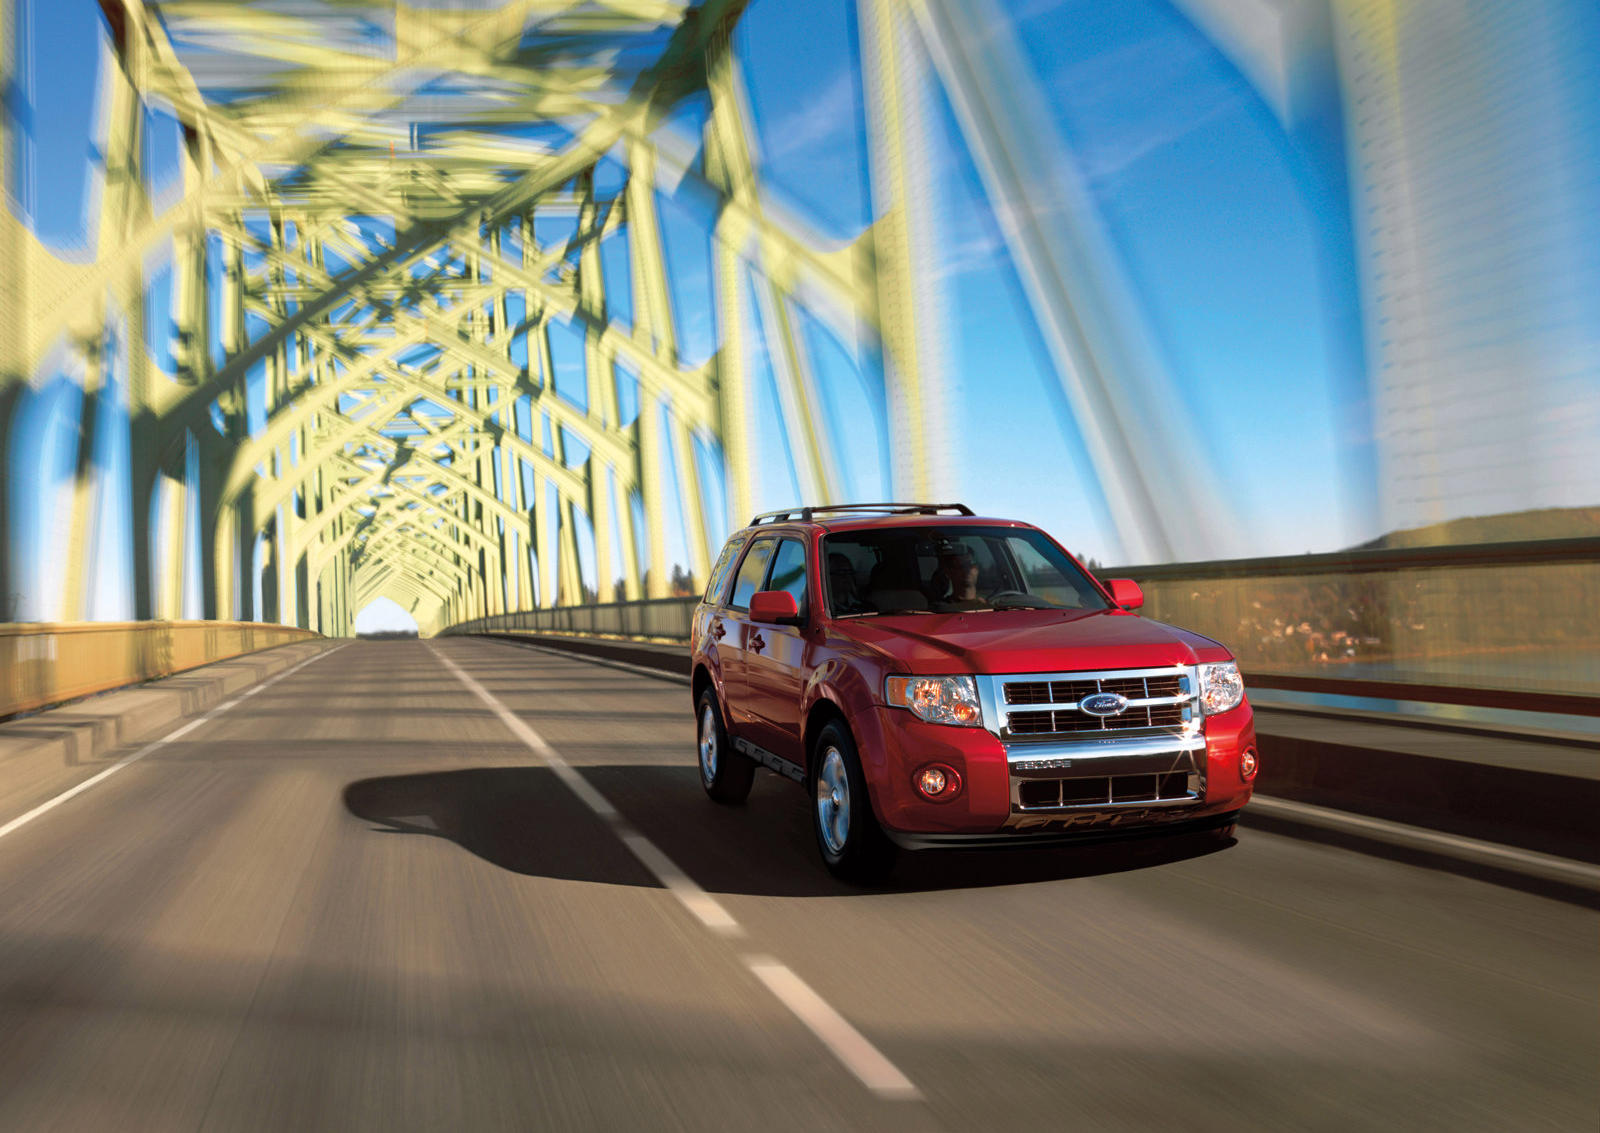 2011 Ford Escape Hybrid Front View Driving